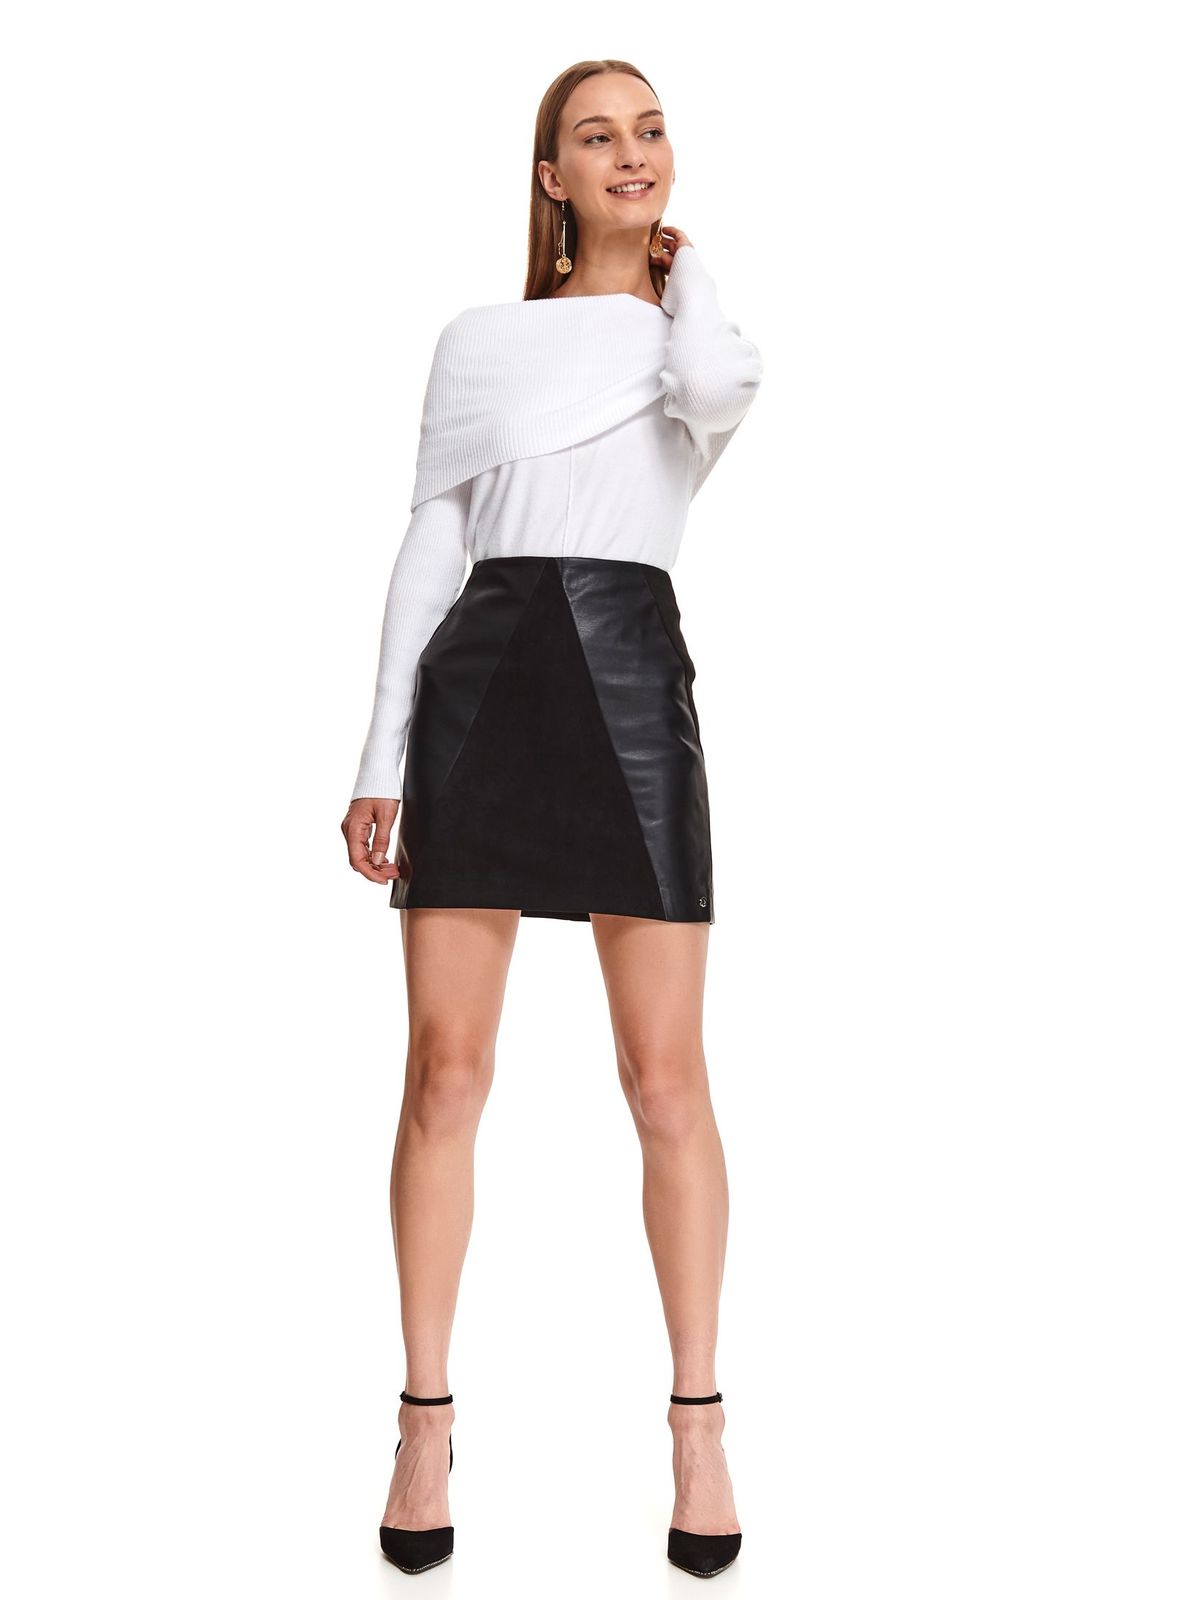 Darkgreen skirt short cut high waisted with tented cut faux leather